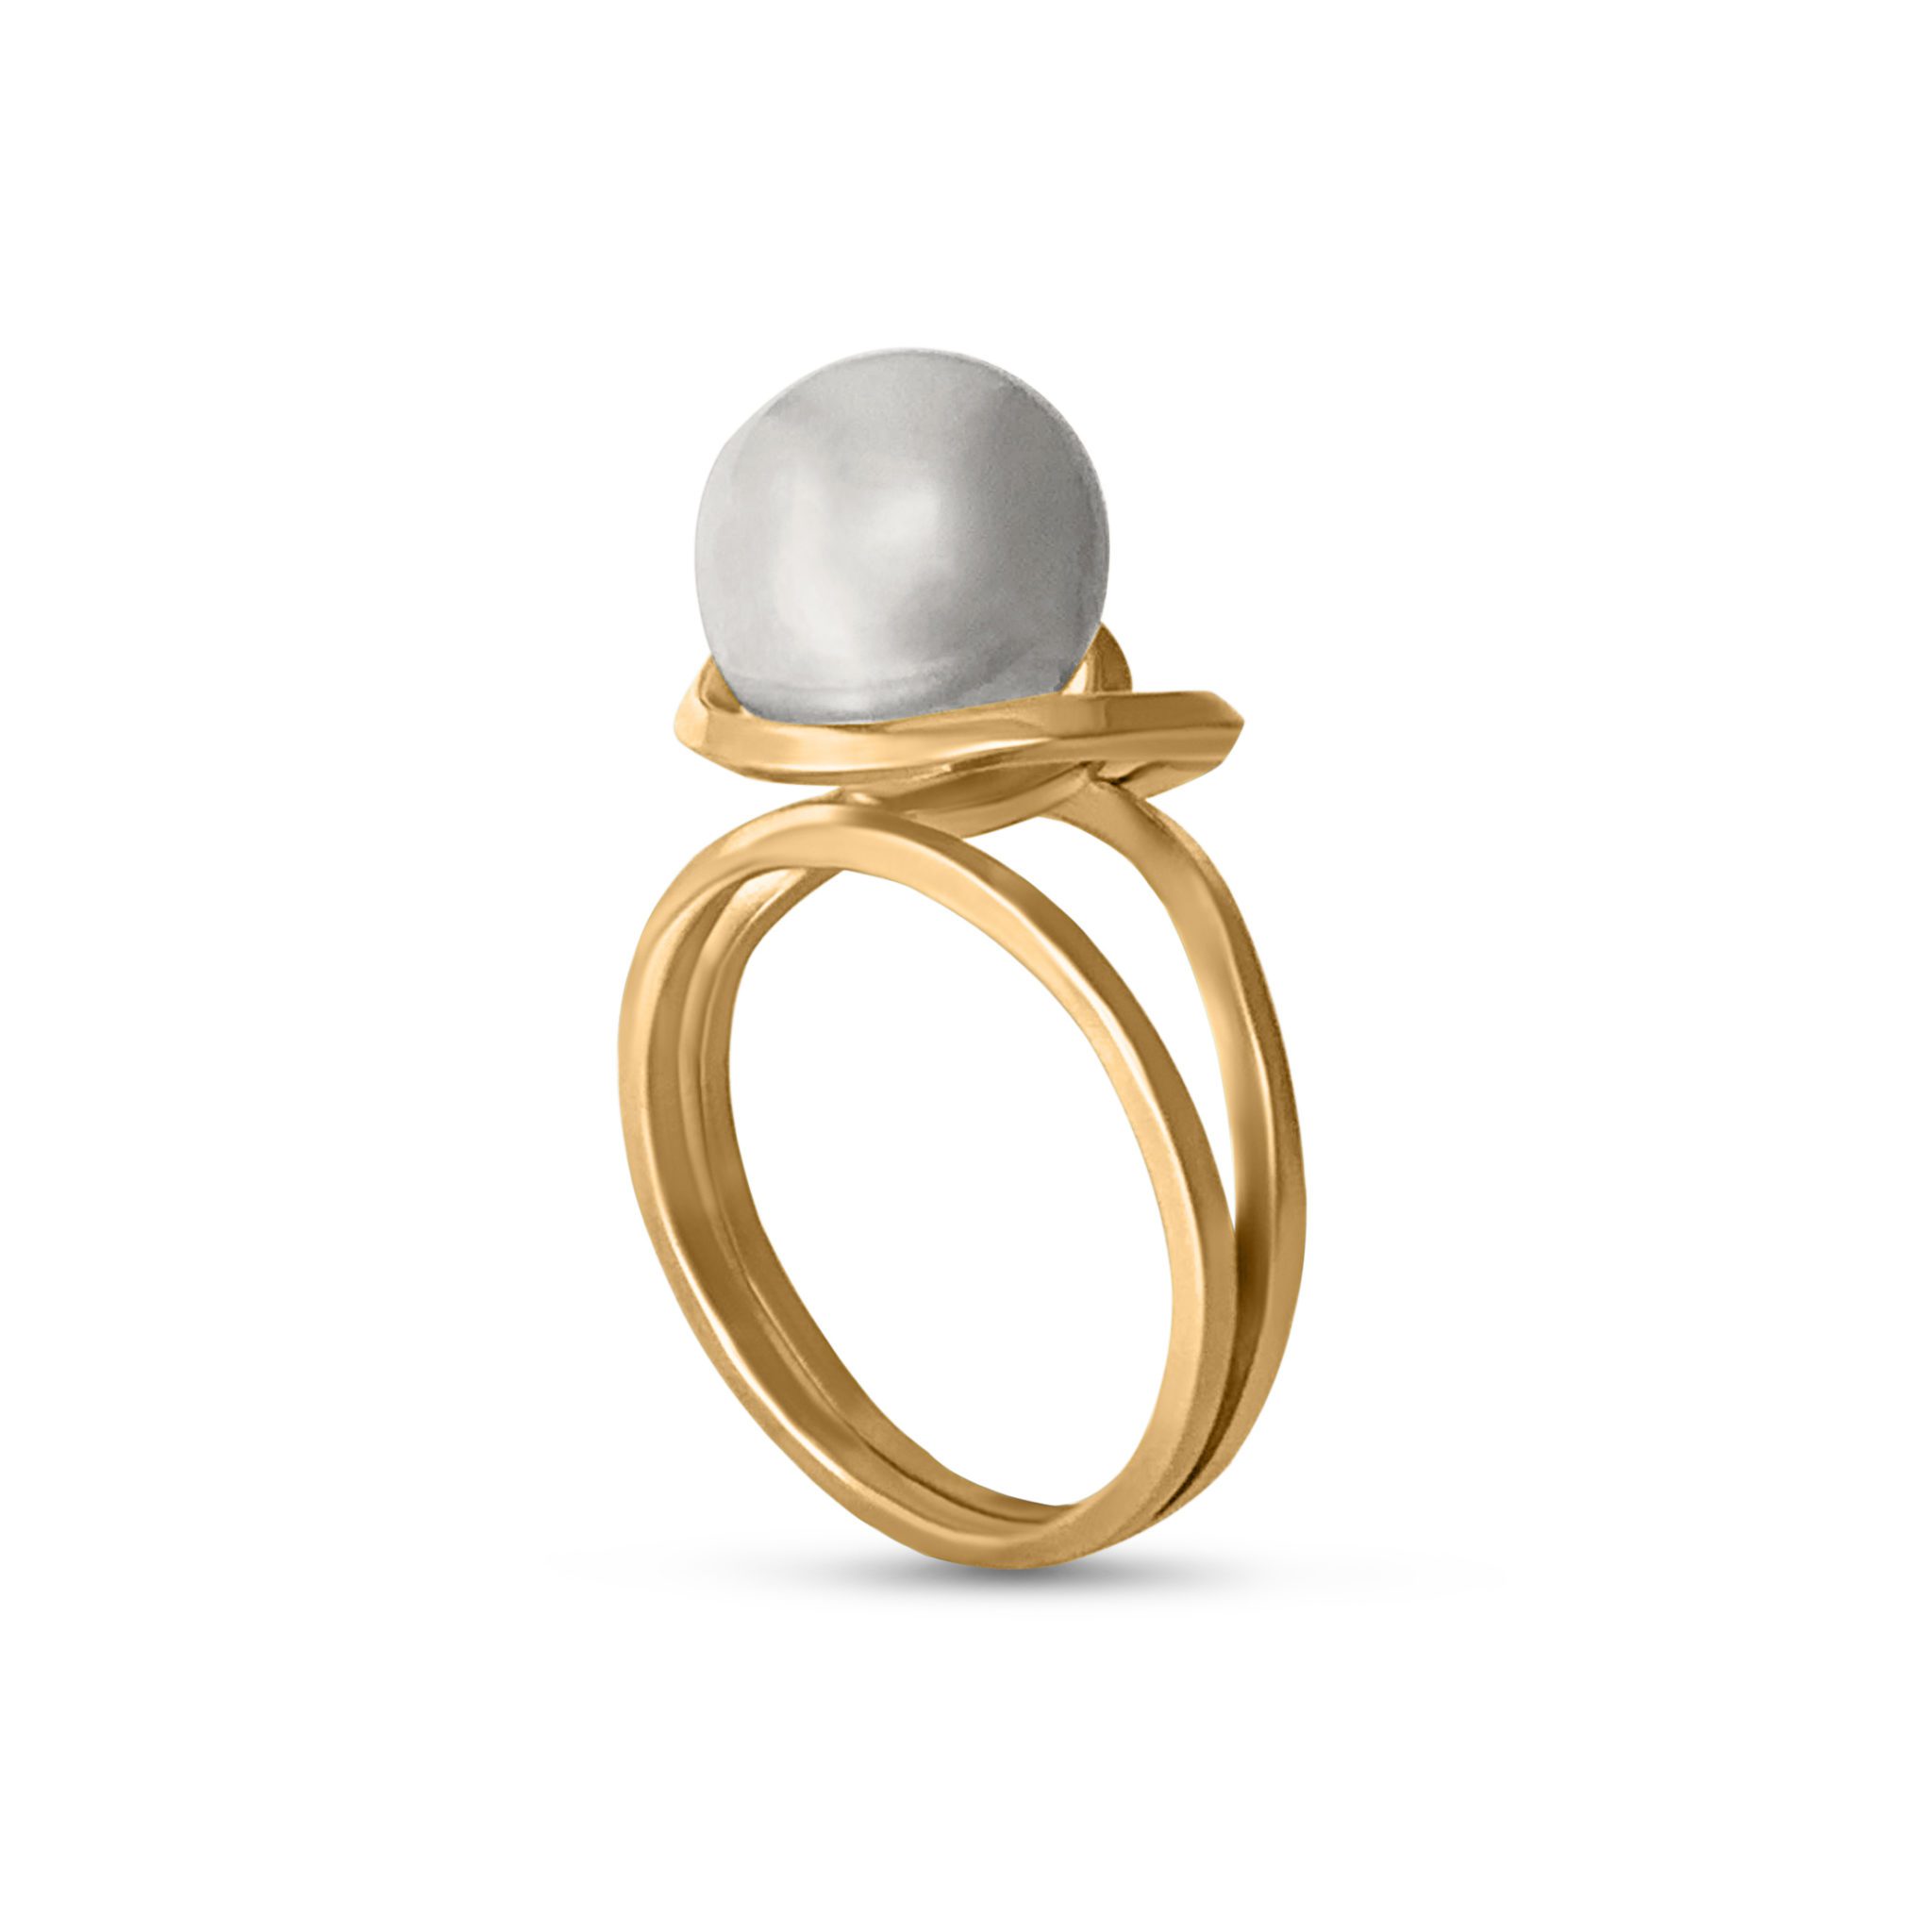 MoonPearl Ring in 18k Yellow Gold with Kasumiga Pearl | Dorothée Rosen ...